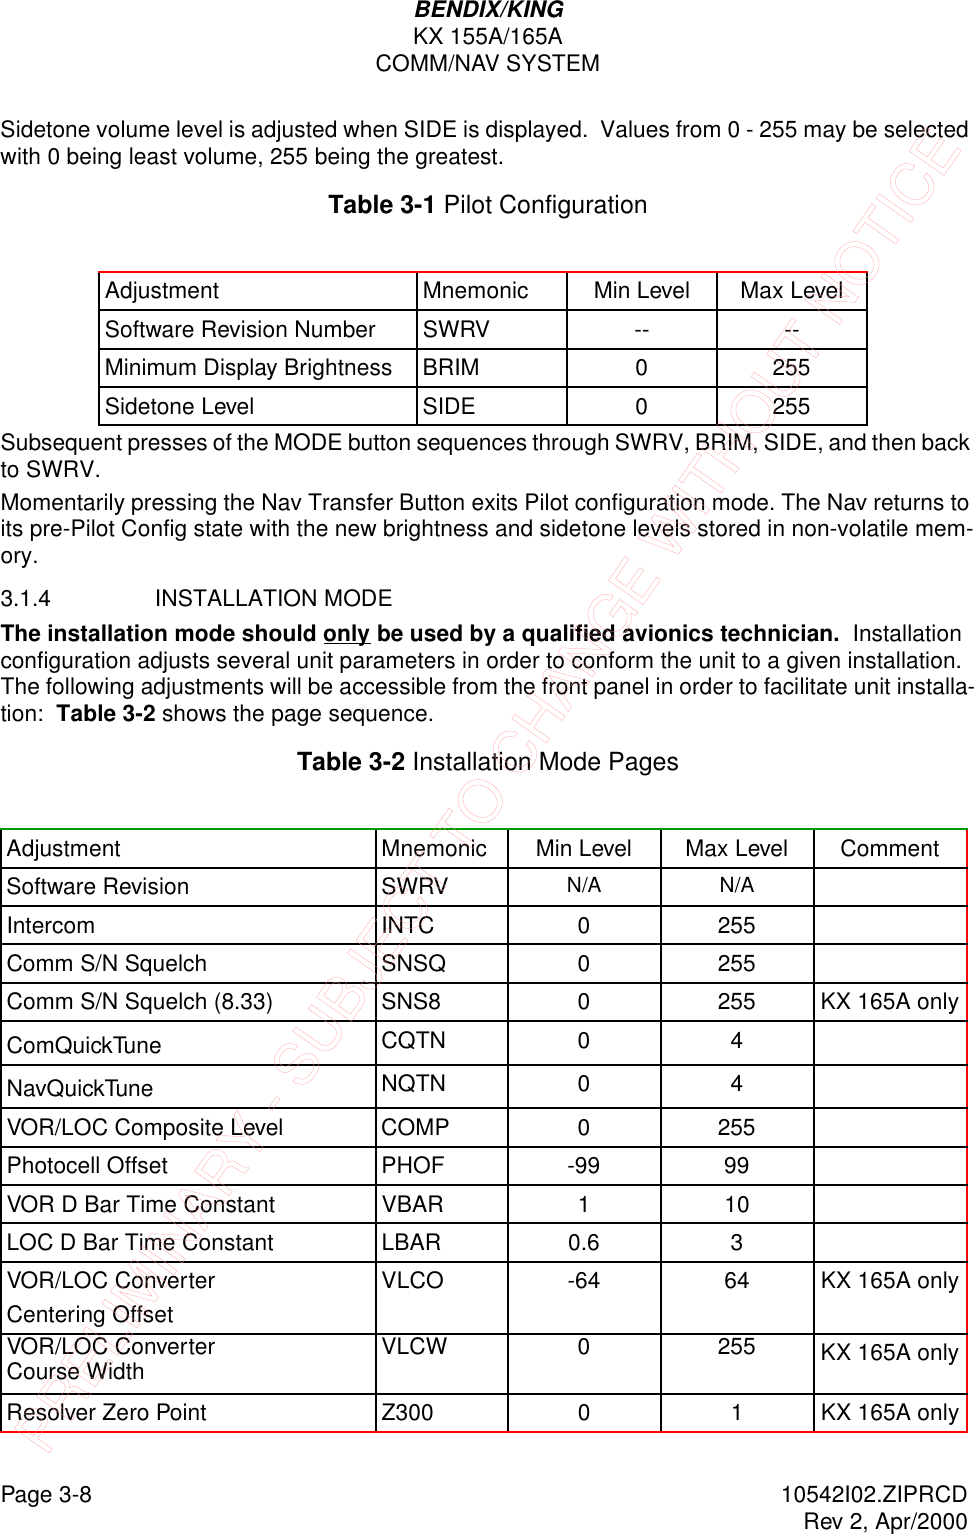 Page 3-8 10542I02.ZIPRCDRev 2, Apr/2000BENDIX/KINGKX 155A/165ACOMM/NAV SYSTEMSidetone volume level is adjusted when SIDE is displayed.  Values from 0 - 255 may be selected with 0 being least volume, 255 being the greatest. Table 3-1 Pilot ConfigurationSubsequent presses of the MODE button sequences through SWRV, BRIM, SIDE, and then back to SWRV.Momentarily pressing the Nav Transfer Button exits Pilot configuration mode. The Nav returns to its pre-Pilot Config state with the new brightness and sidetone levels stored in non-volatile mem-ory. 3.1.4 INSTALLATION MODEThe installation mode should only be used by a qualified avionics technician.  Installation configuration adjusts several unit parameters in order to conform the unit to a given installation.  The following adjustments will be accessible from the front panel in order to facilitate unit installa-tion:  Table 3-2 shows the page sequence.Table 3-2 Installation Mode PagesAdjustment Mnemonic Min Level Max LevelSoftware Revision Number SWRV -- --Minimum Display Brightness BRIM 0 255Sidetone Level SIDE 0 255Adjustment Mnemonic Min Level Max Level CommentSoftware Revision SWRV N/A N/AIntercom INTC 0 255Comm S/N Squelch SNSQ 0 255Comm S/N Squelch (8.33) SNS8 0 255 KX 165A onlyComQuickTune CQTN 0 4NavQuickTune NQTN 0 4VOR/LOC Composite Level COMP 0 255Photocell Offset PHOF -99 99VOR D Bar Time Constant VBAR 1 10LOC D Bar Time Constant LBAR 0.6 3VOR/LOC Converter Centering OffsetVLCO  -64 64 KX 165A onlyVOR/LOC Converter Course Width VLCW 0 255 KX 165A onlyResolver Zero Point Z300 0 1 KX 165A onlyPRELIMINARY - SUBJECT TO CHANGE WITHOUT NOTICE